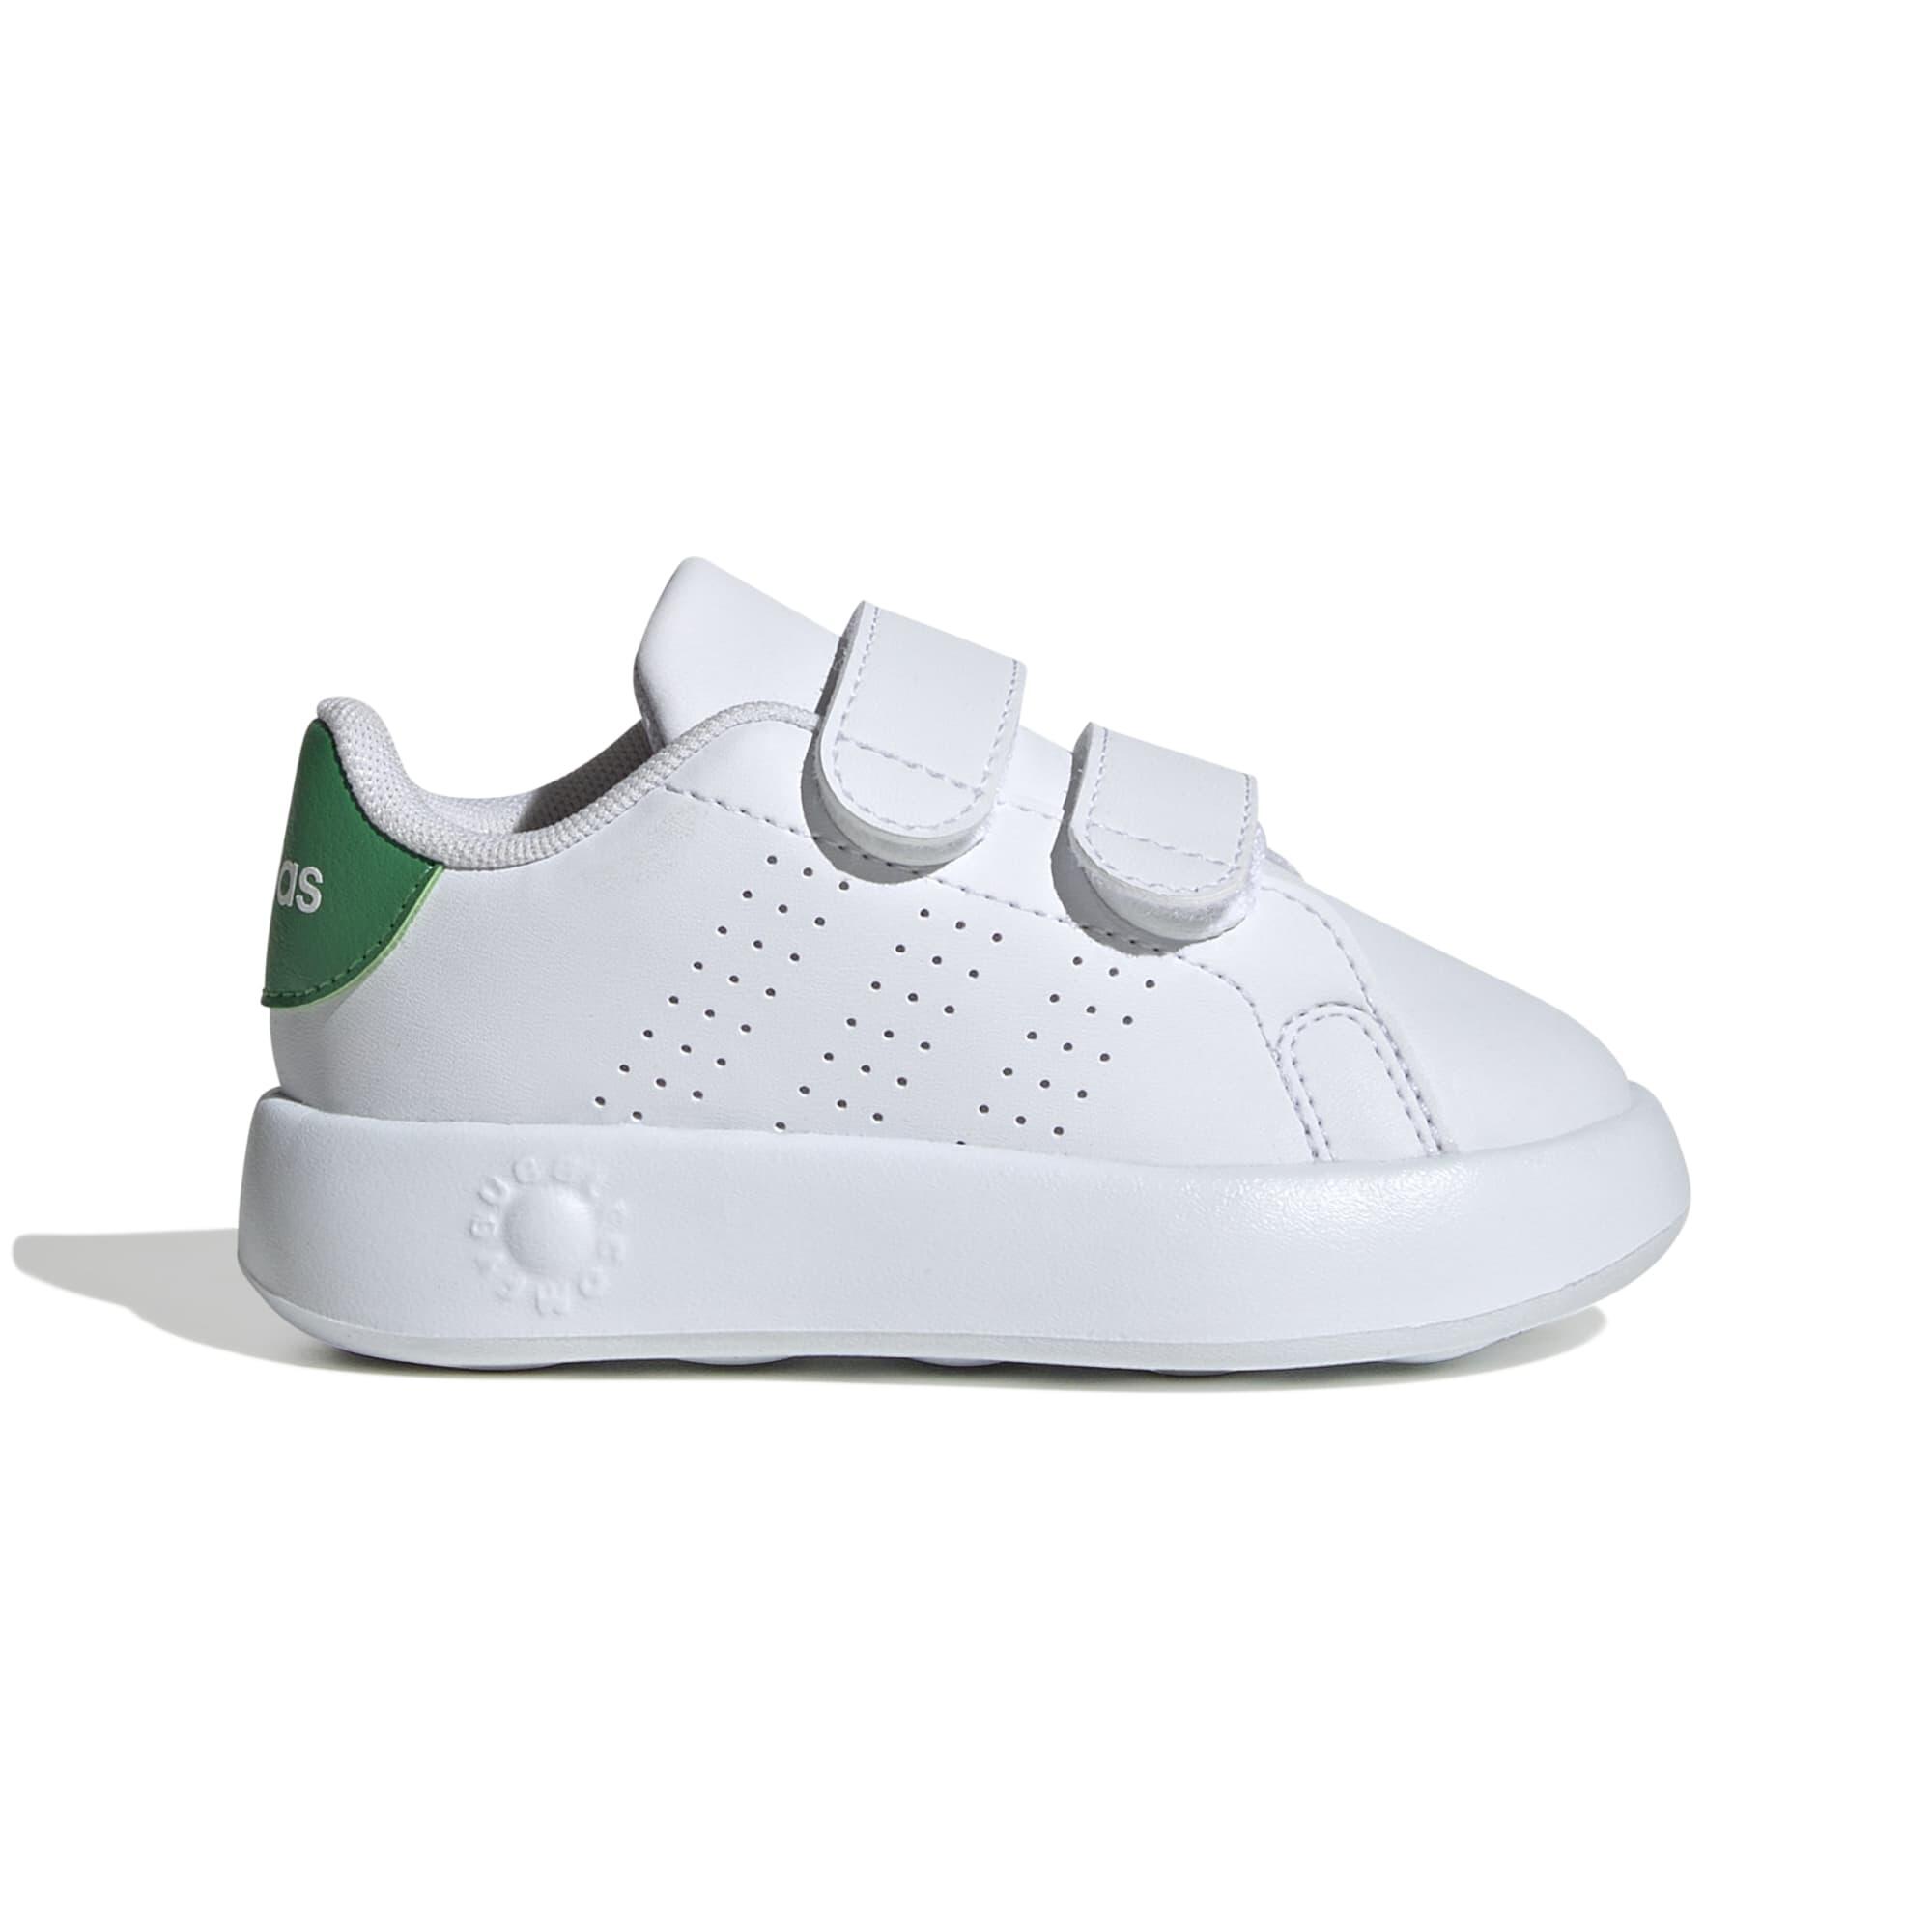 Adidas Baby Shoes Advantage (3.5c To 9c) - White/green